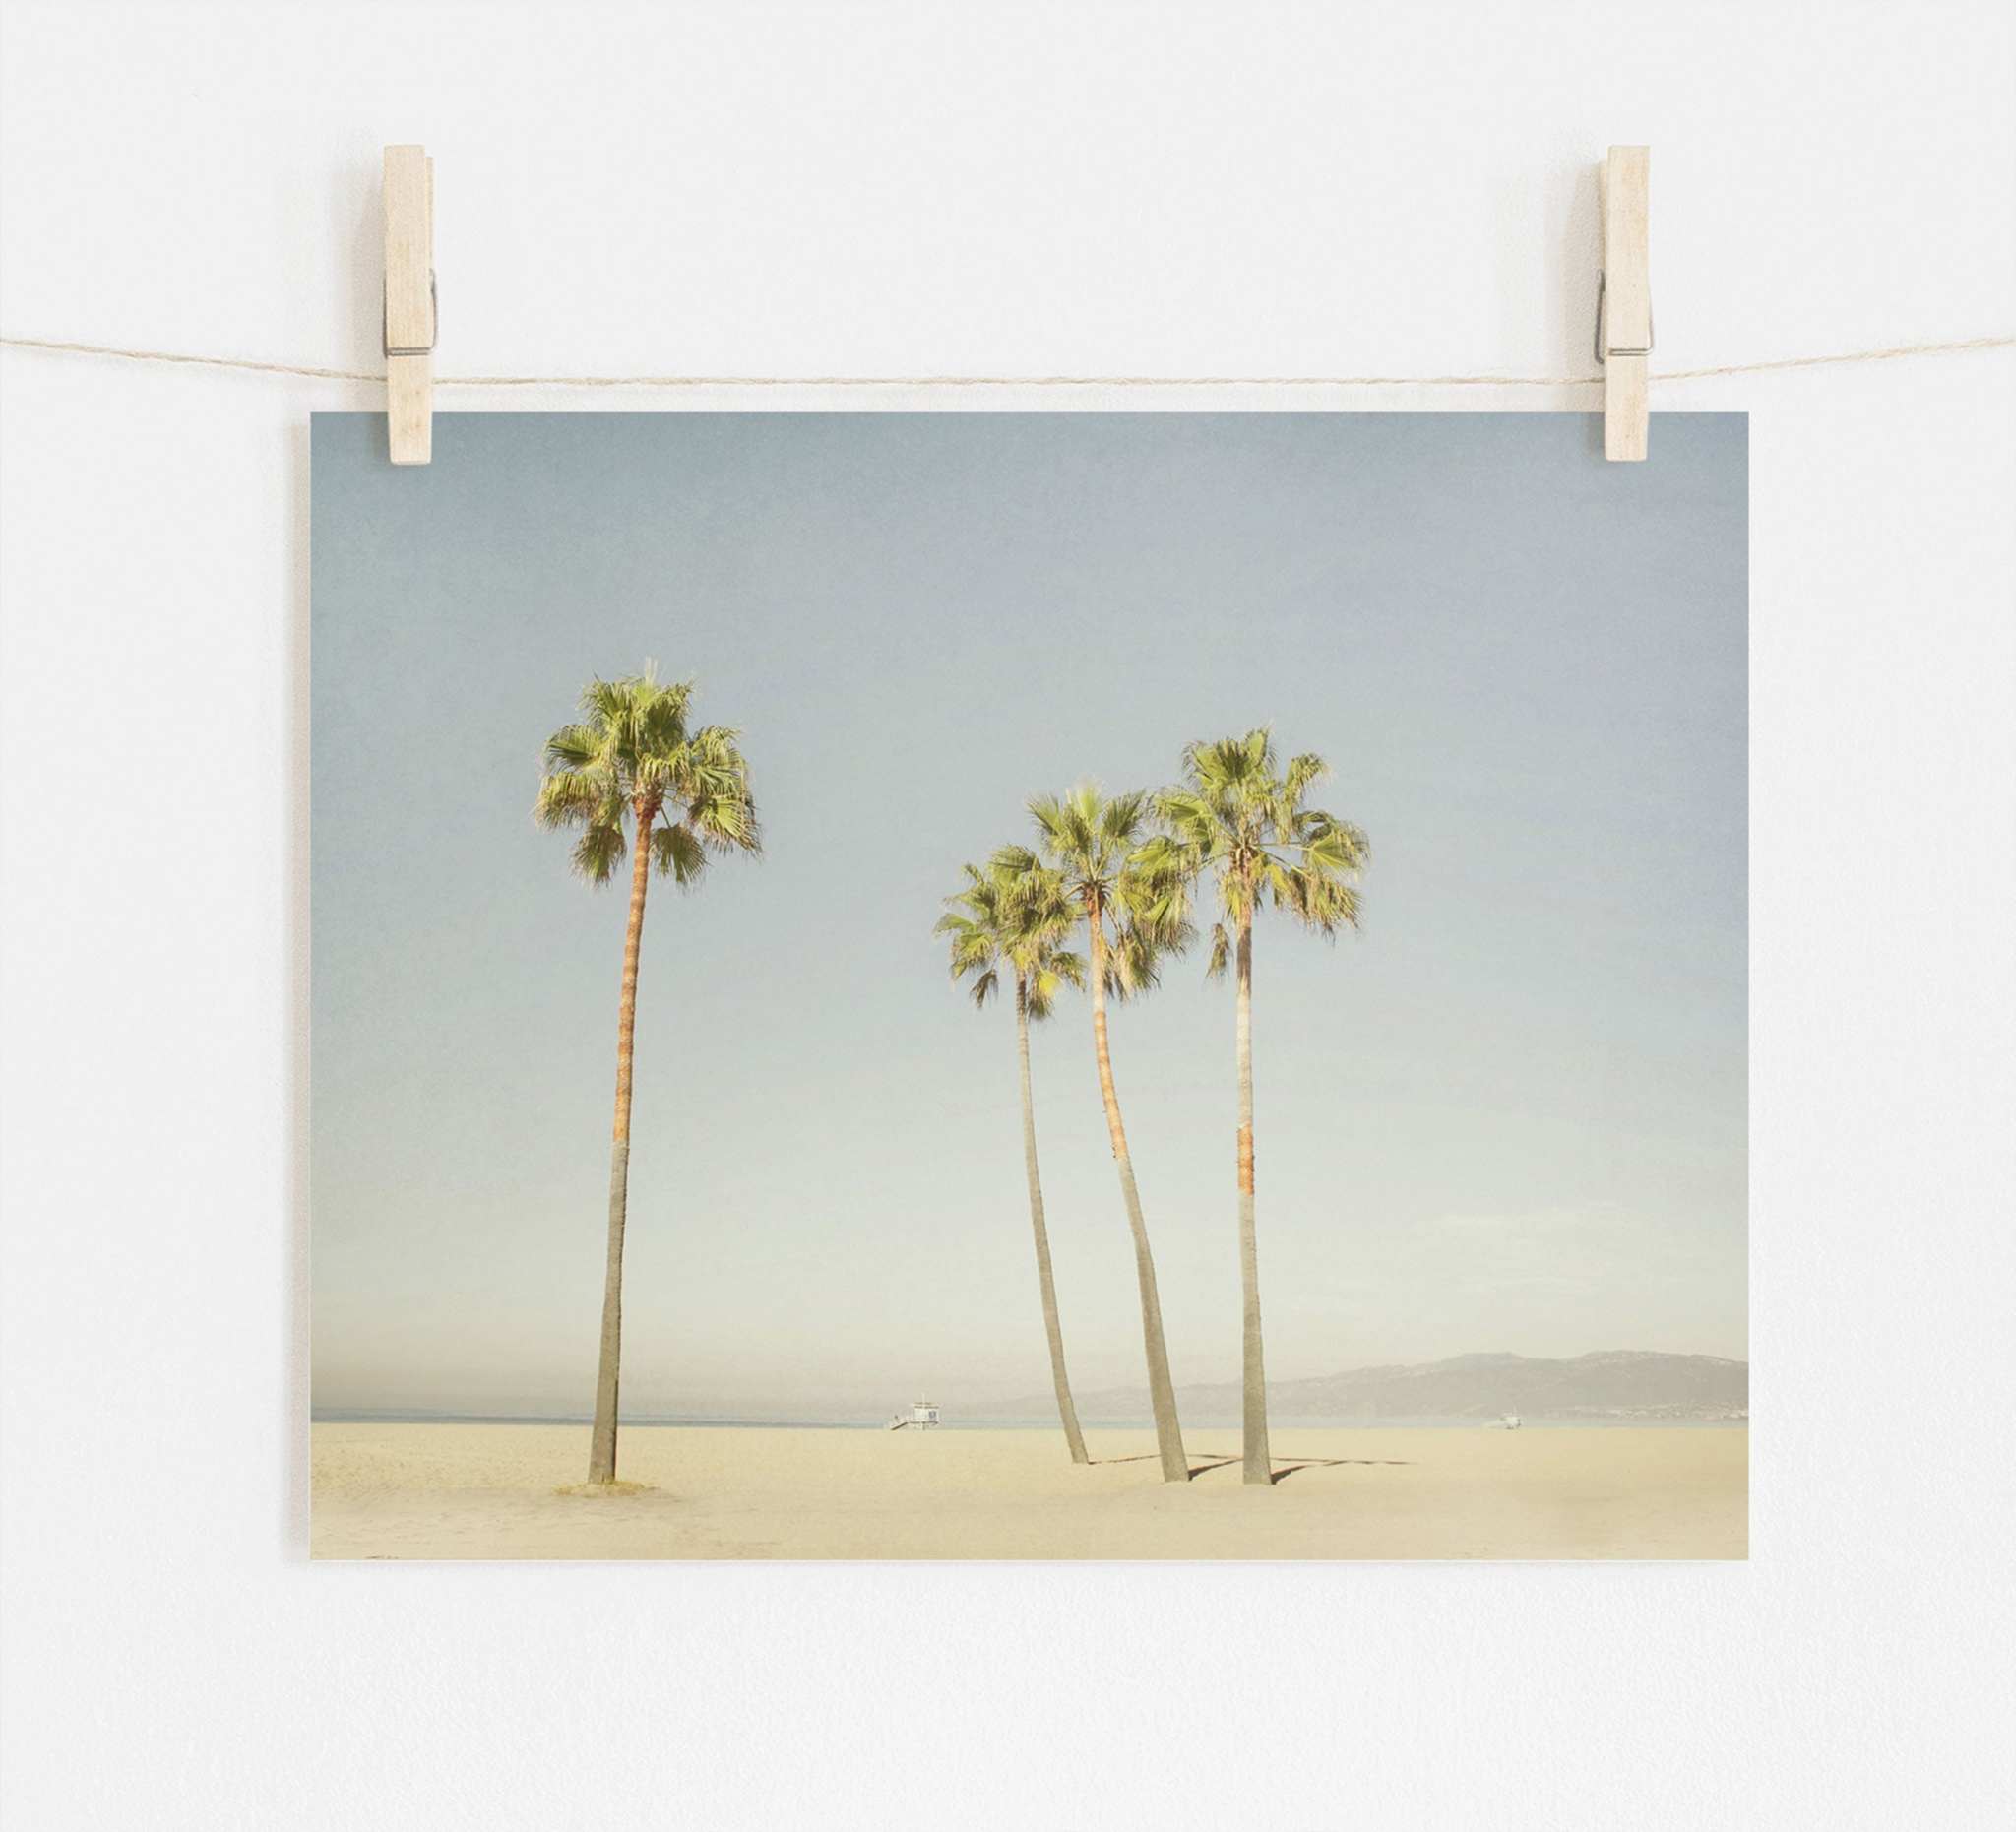 Photo of a tranquil California Venice Beach scene with four tall palm trees printed on archival photographic paper, hanging on a white wall, clipped with two wooden clothespins on a string. Soft, muted colors evoke a serene atmosphere. Brand: Offley Green.